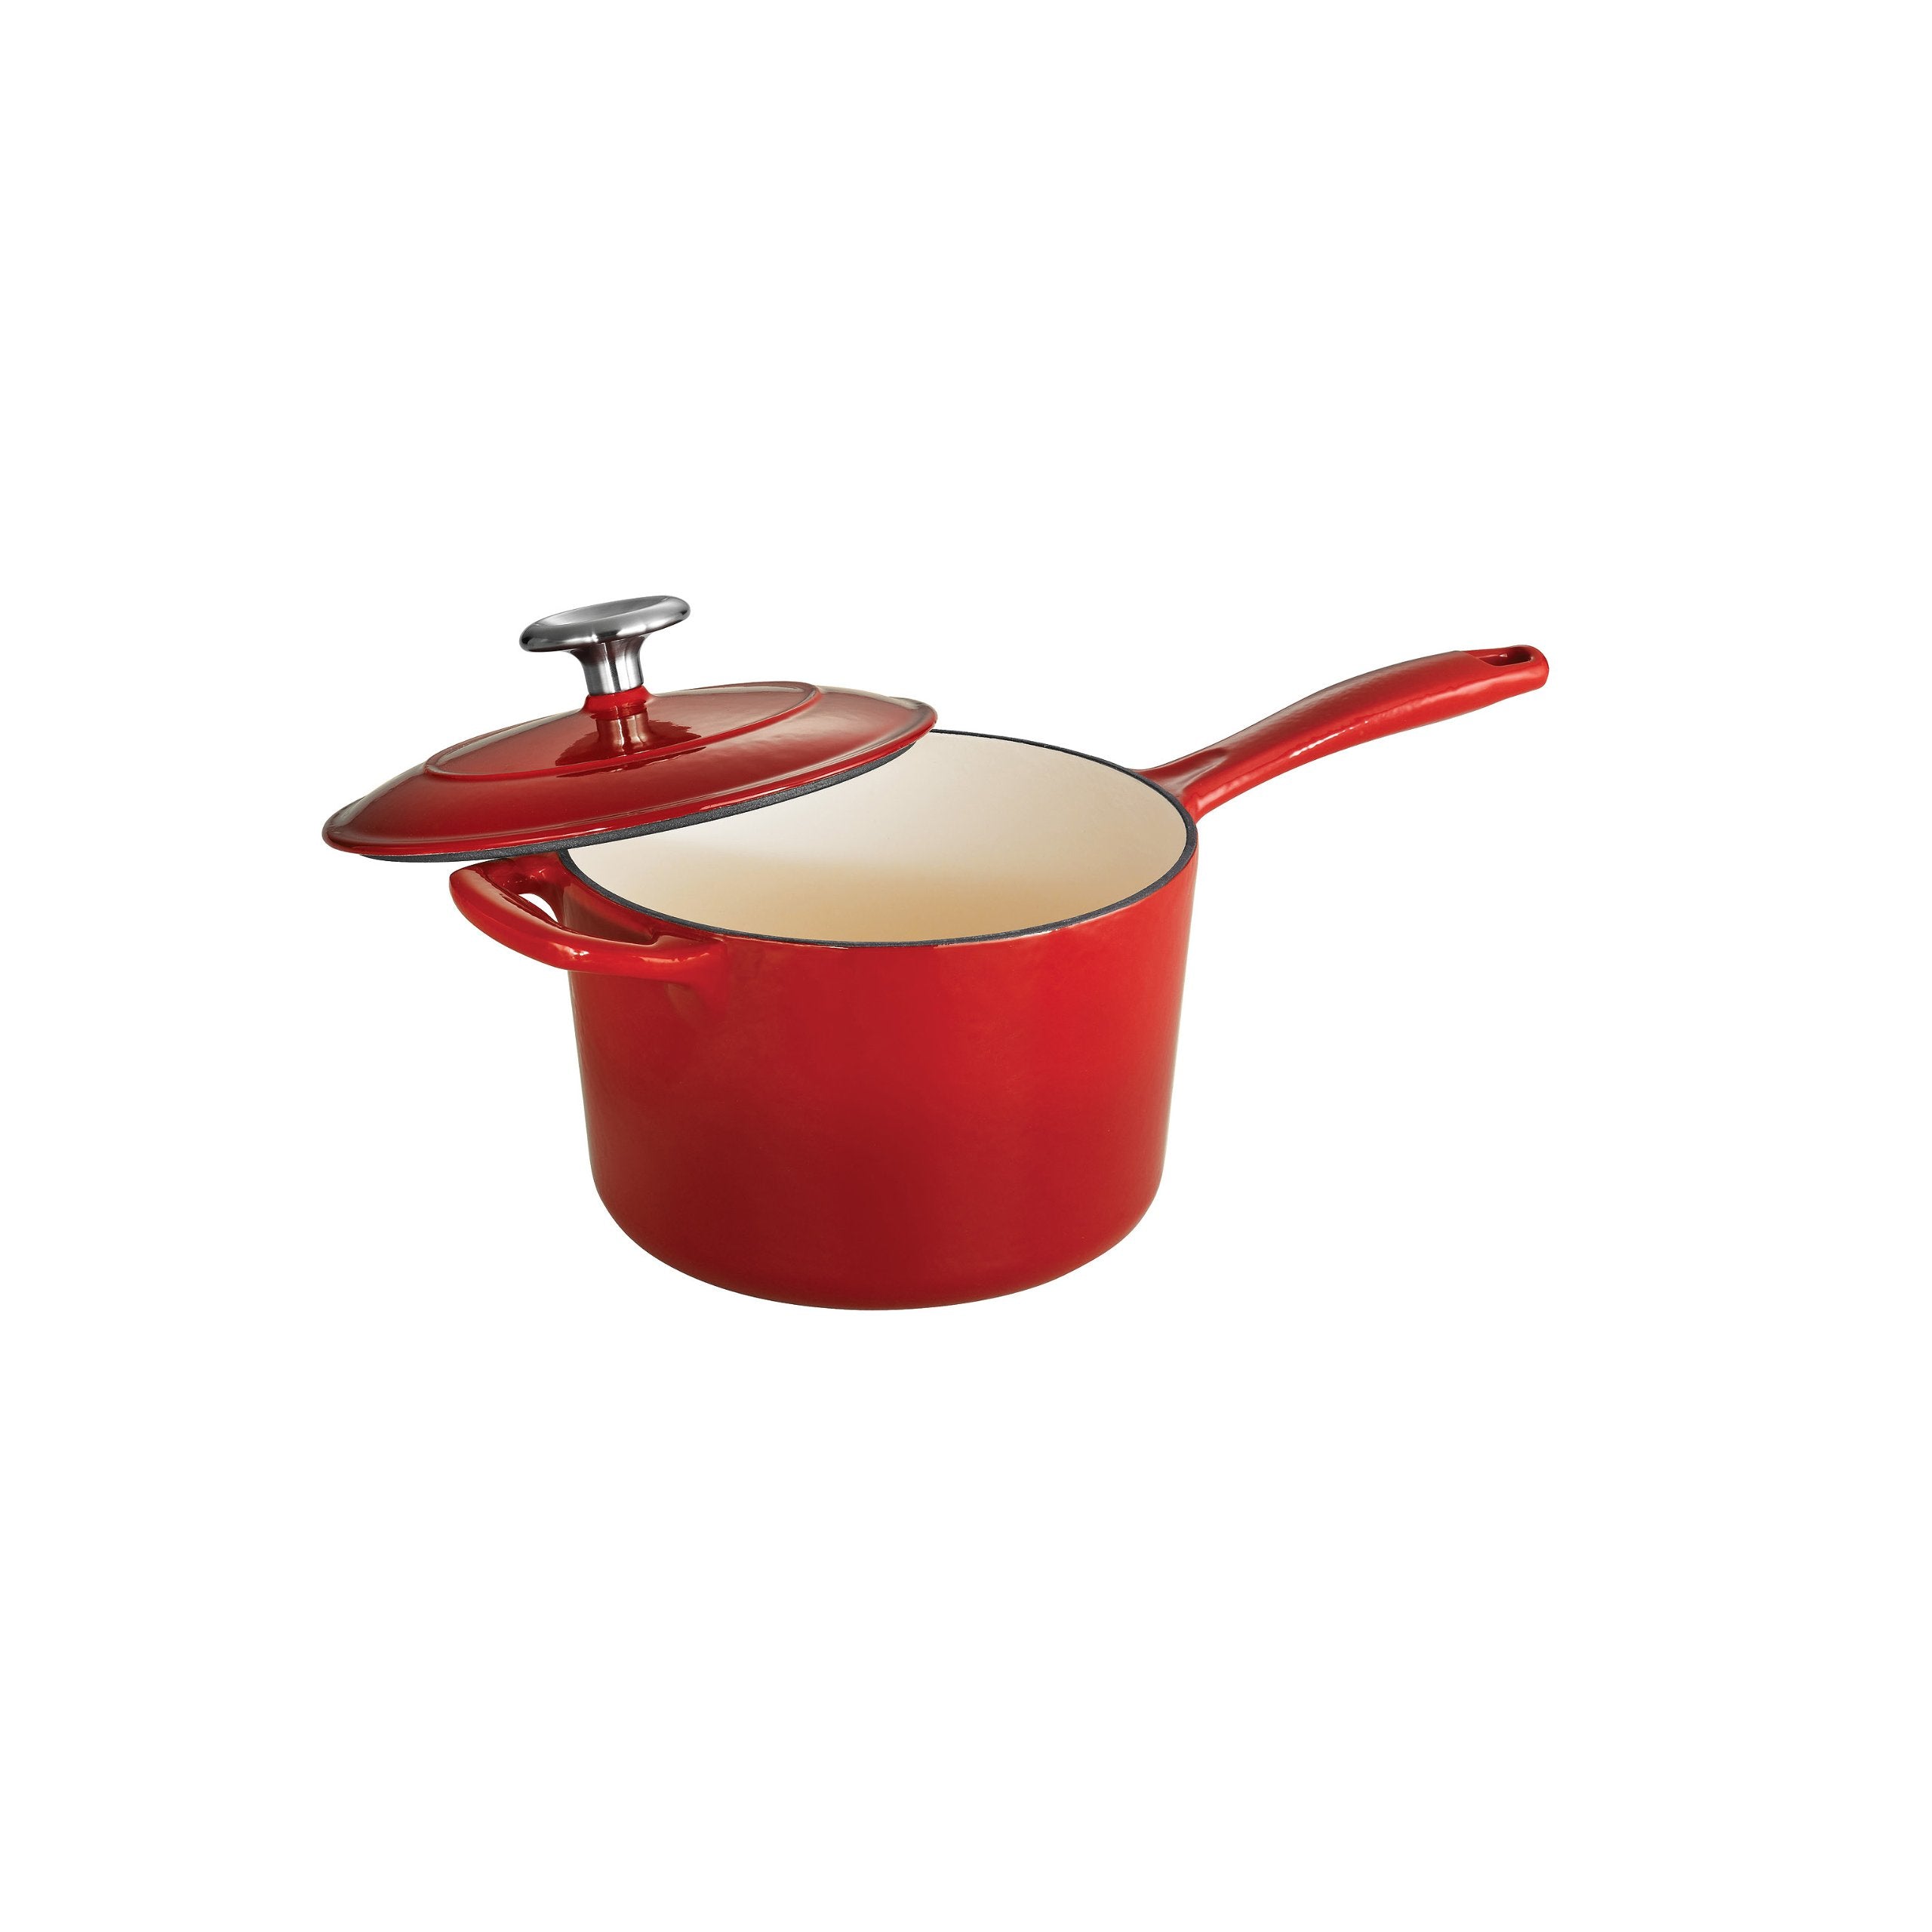 Tramontina Covered Sauce Pan Enameled Cast Iron 2.5-Quart, Gradated Red